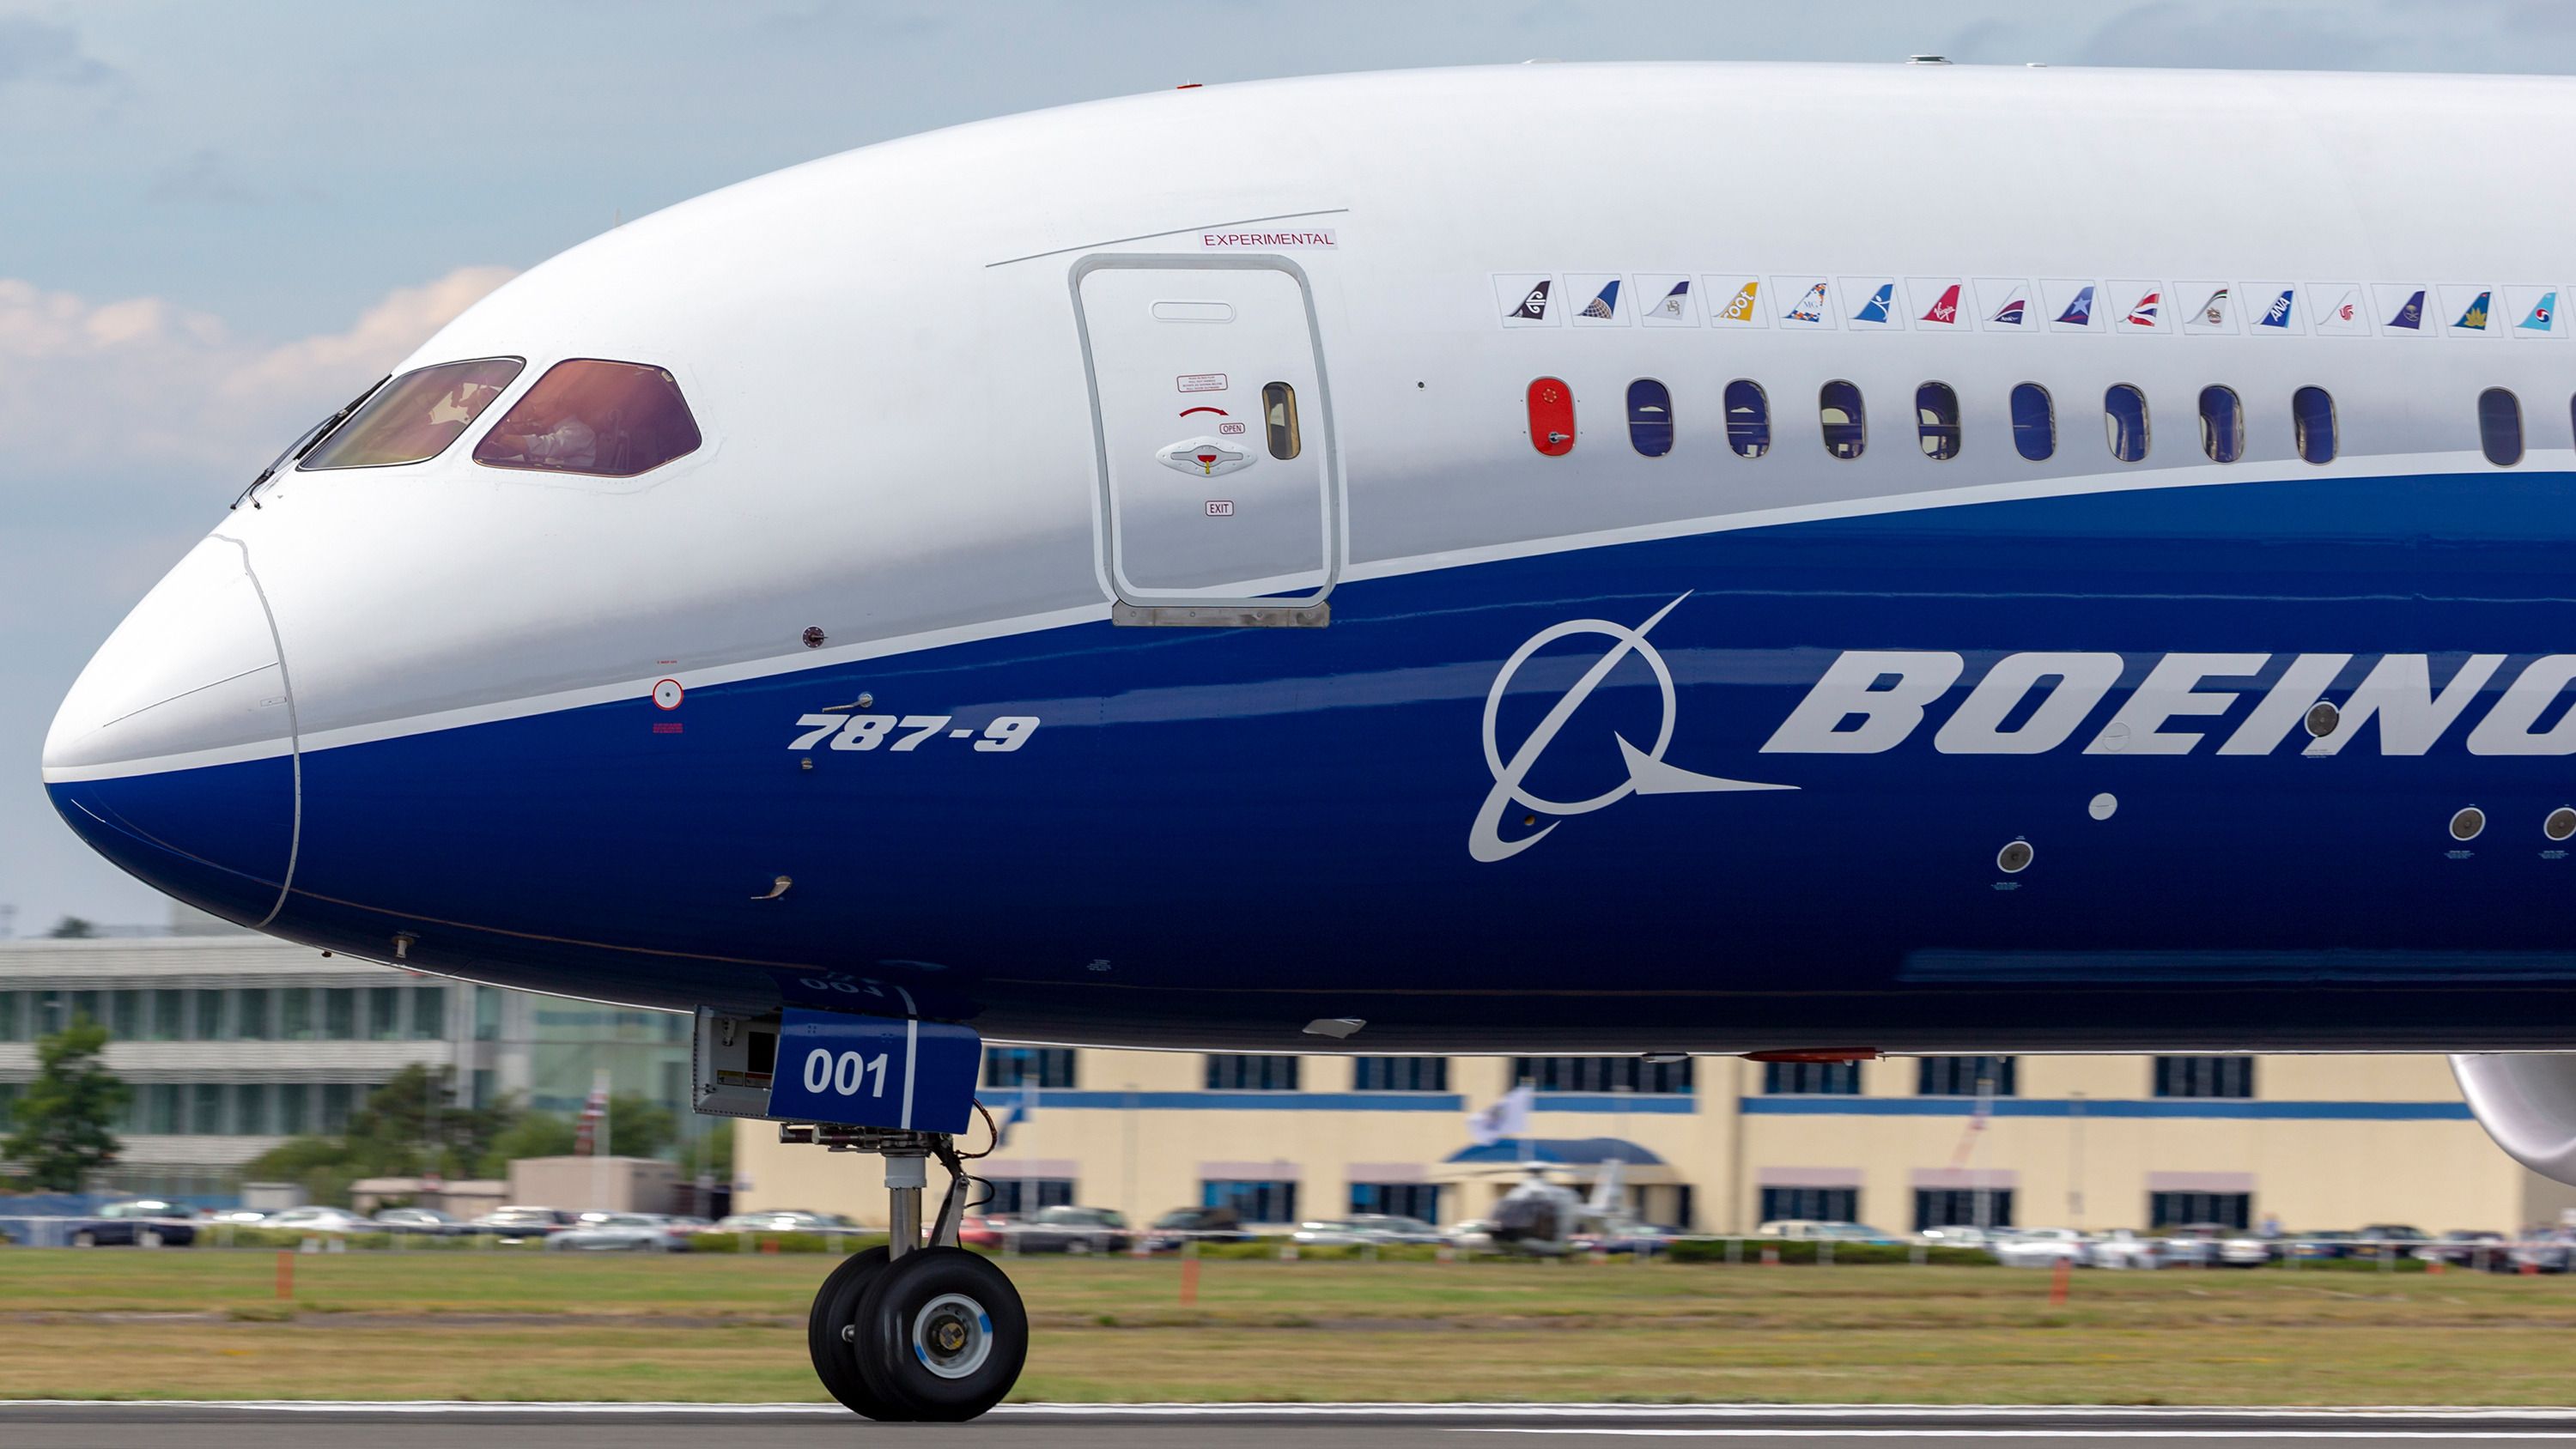 A Boeing 787-9 Dreamliner on the ground in Farnborough.